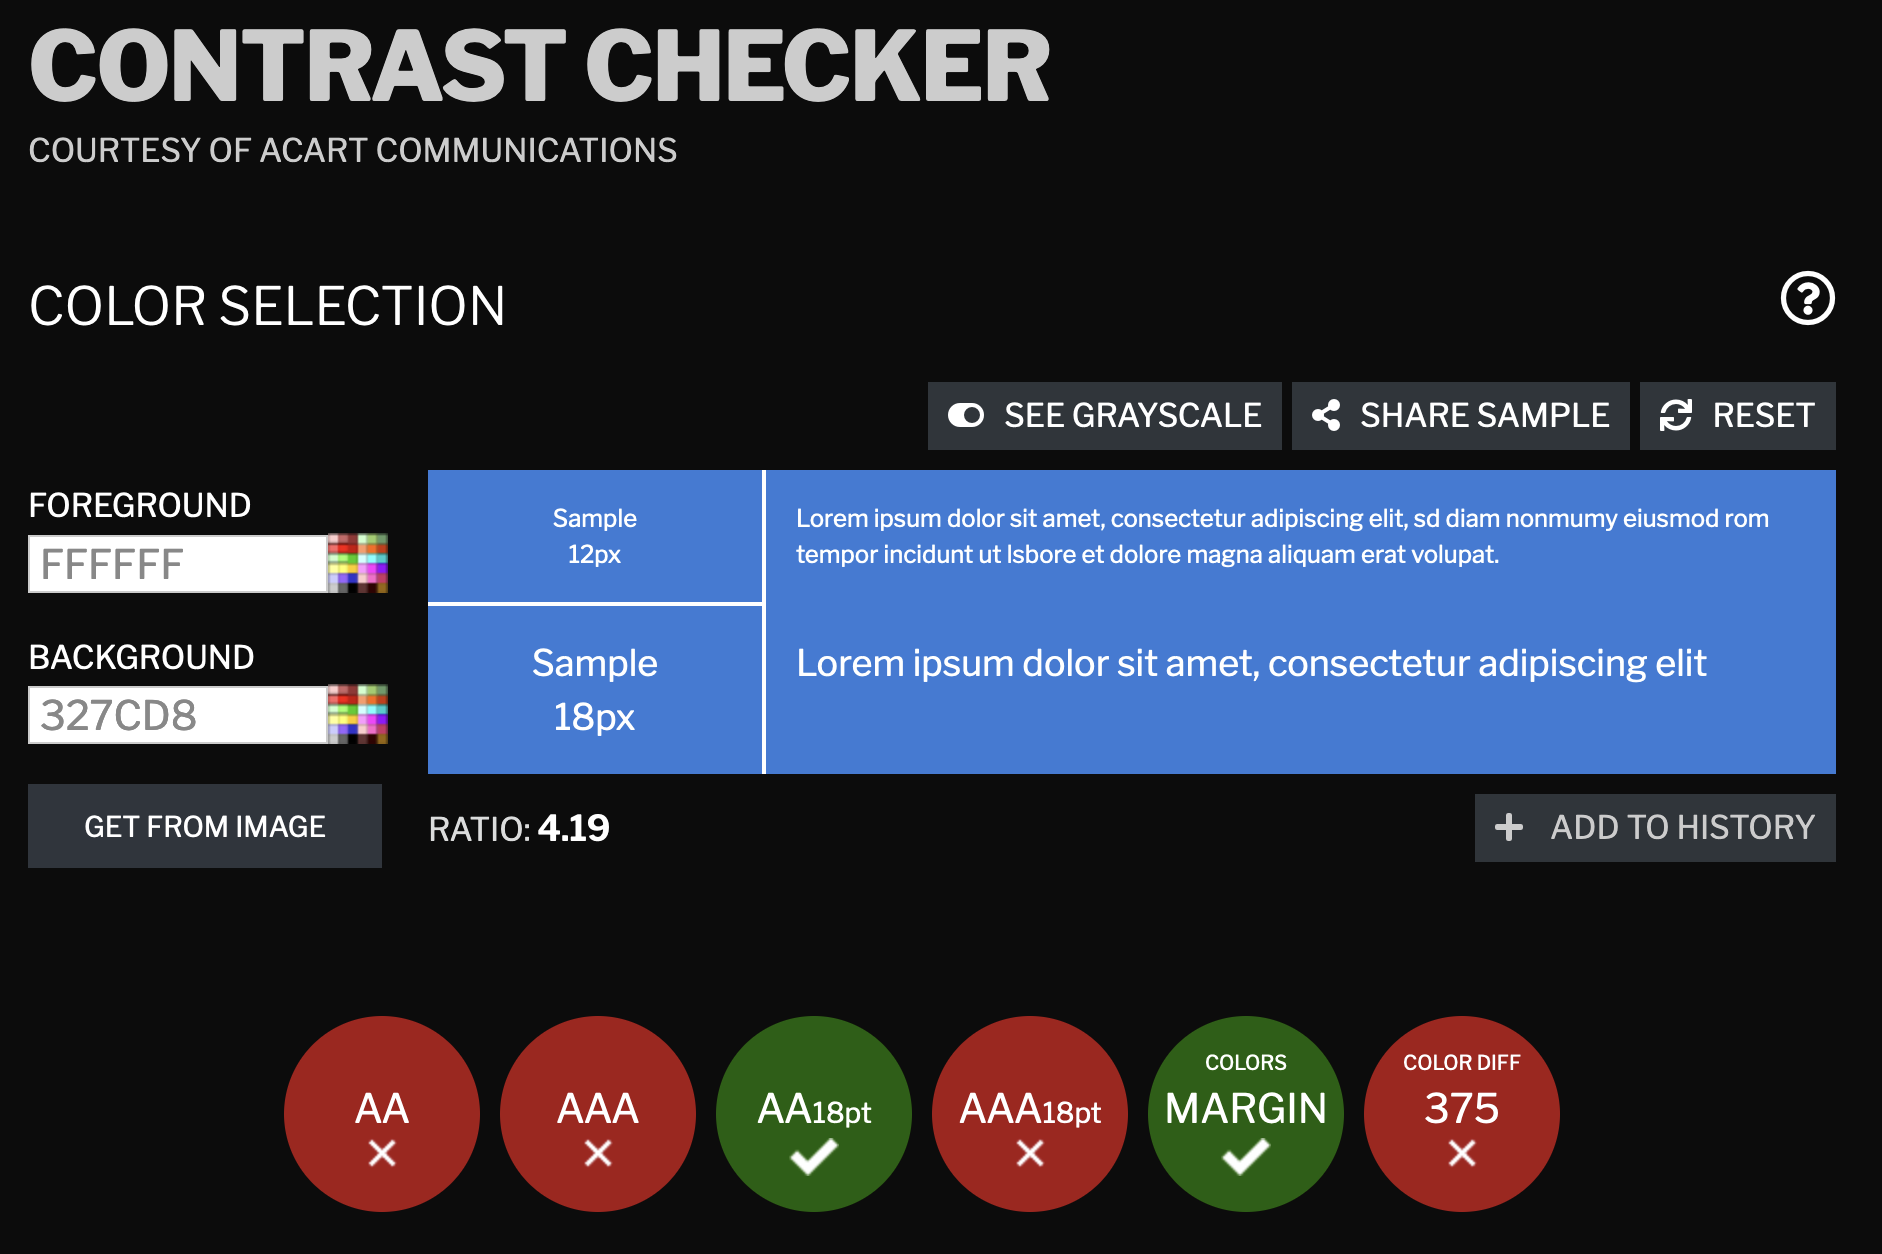 A screenshot of the interface of contrastchecker.com showing that the contrast between white text and a blue background is too low